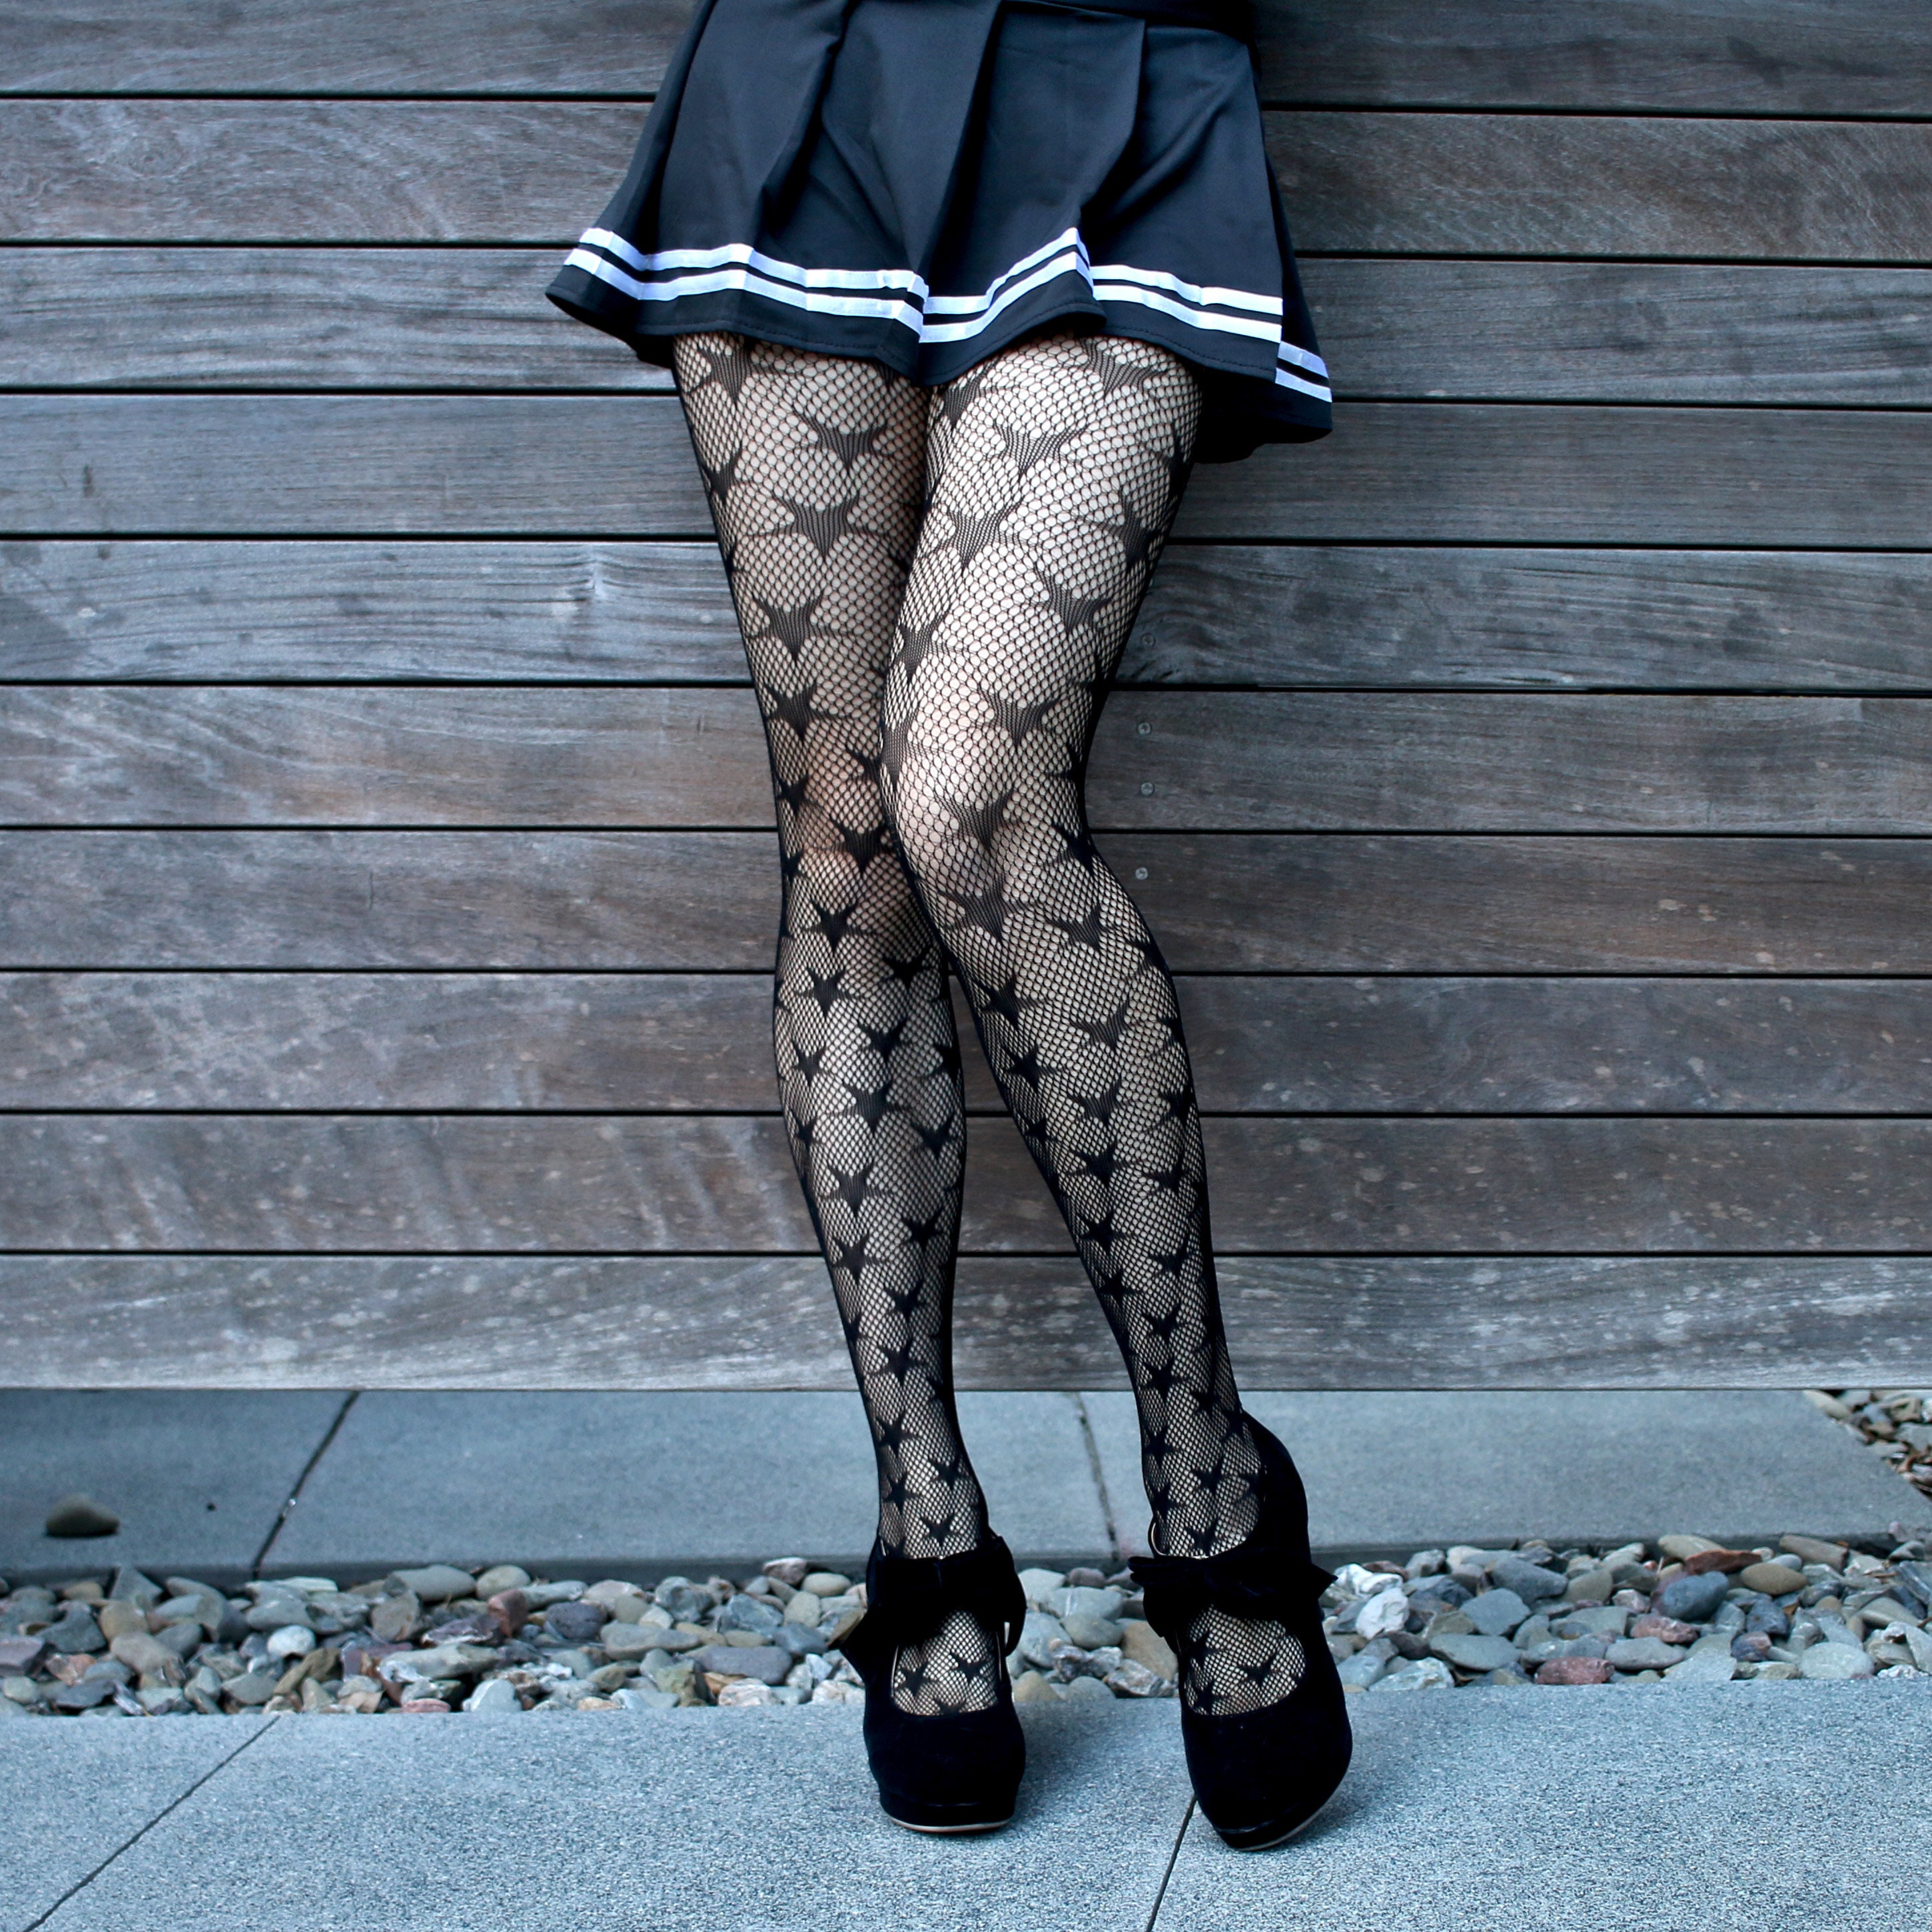 Star Fishnet Patterned Tights Goth, Alt Girl Stockings, Sexy Mesh Pantyhose  Lingerie 